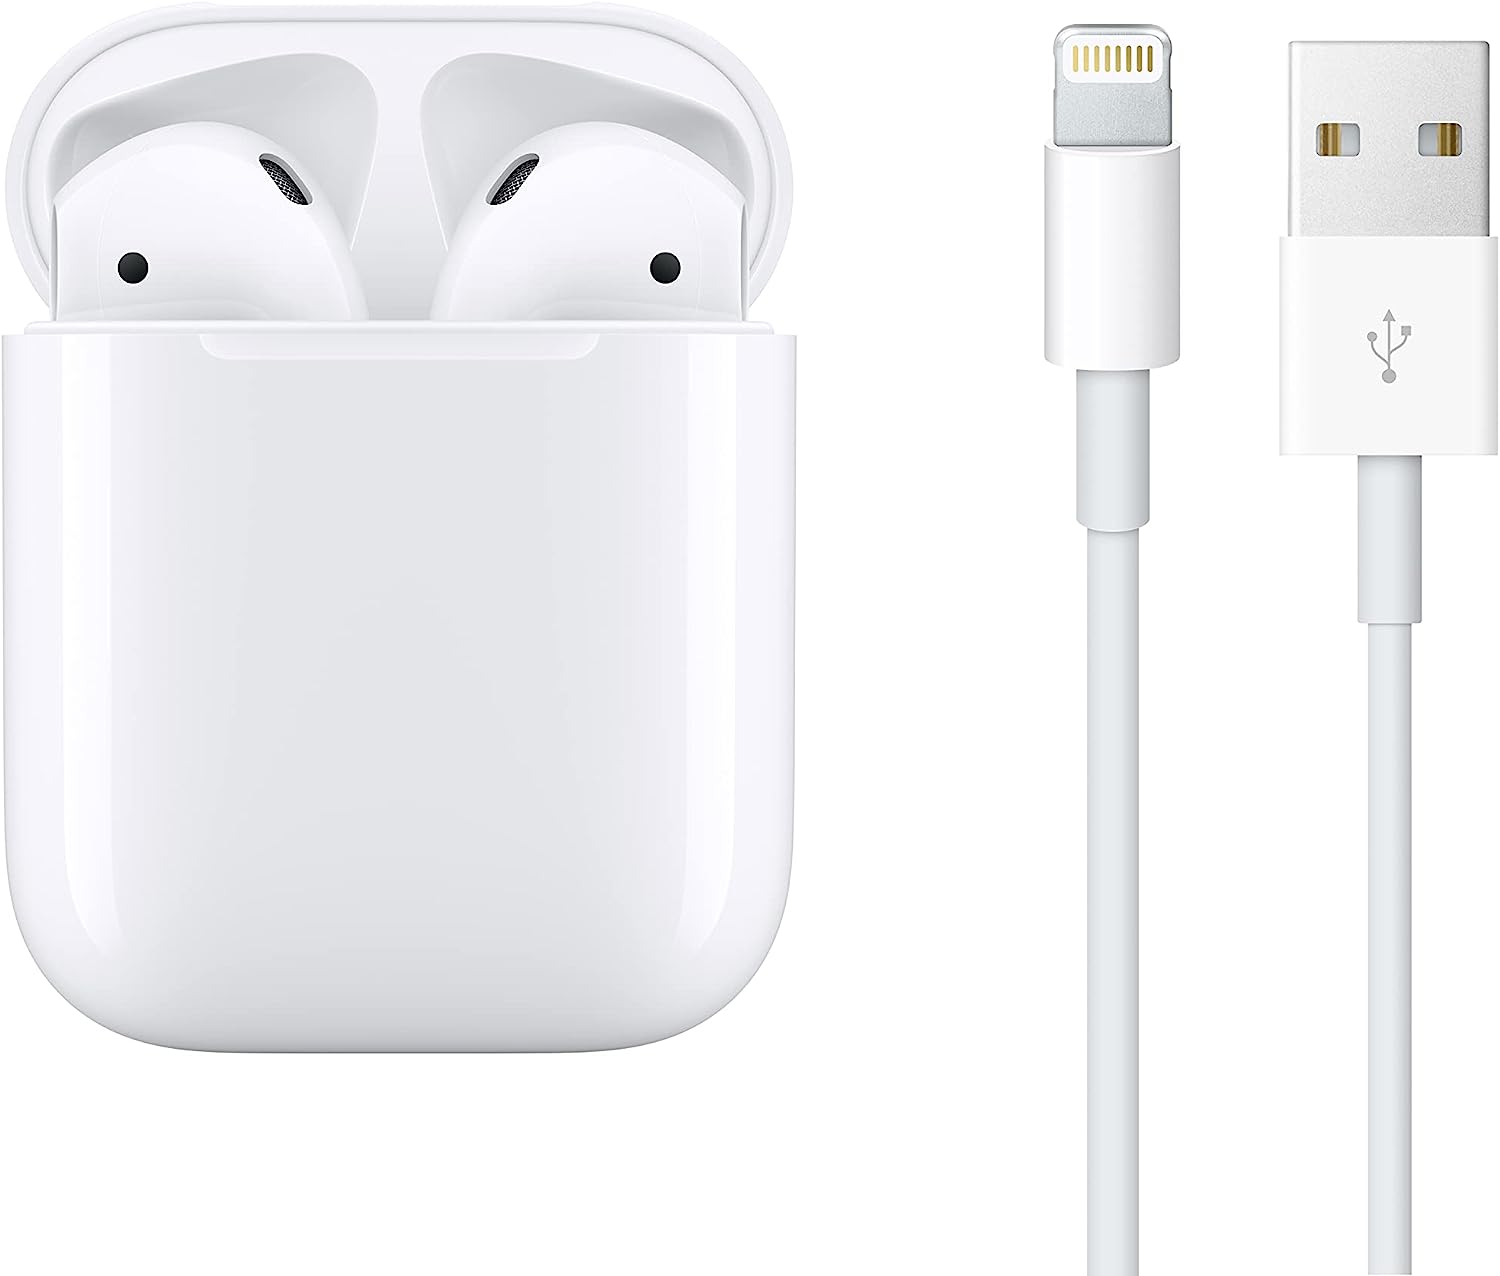 Apple AirPods (2nd Generation) Wireless Earbuds with Lightning Charging Case